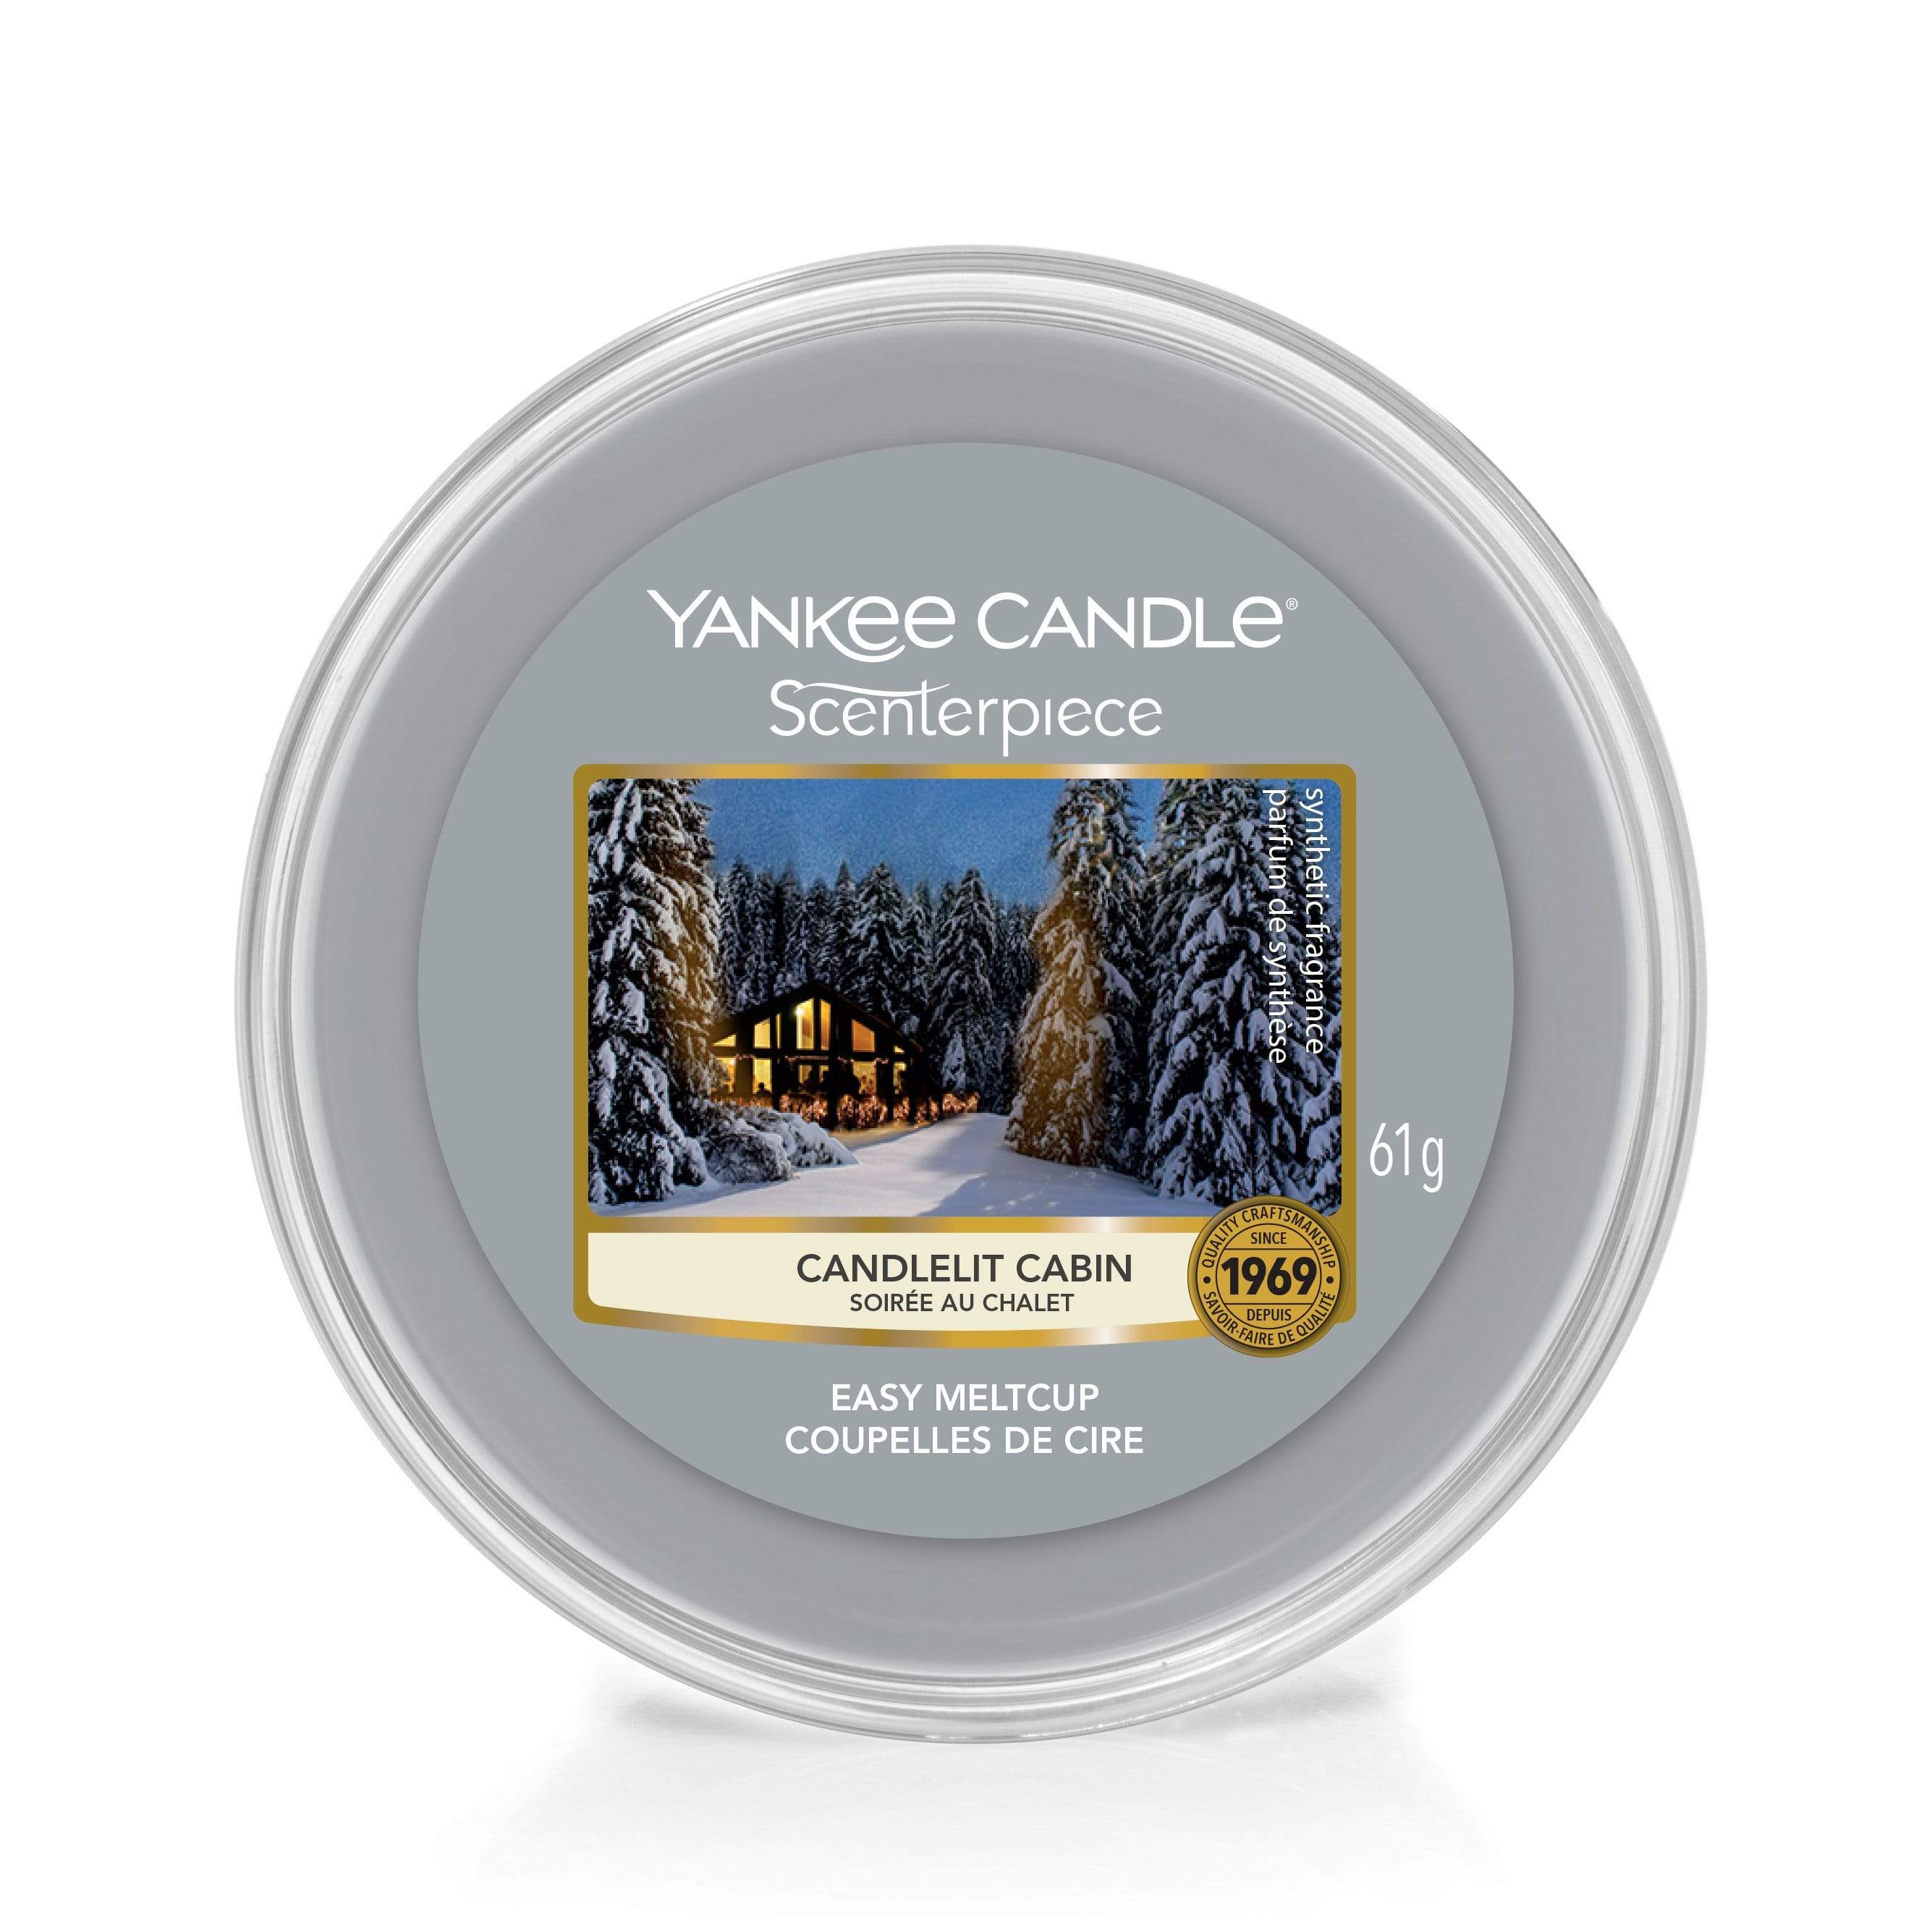 Yankee Candle Melt Cup Yankee Candle Scenterpiece Melt Cup - Candlelit Cabin